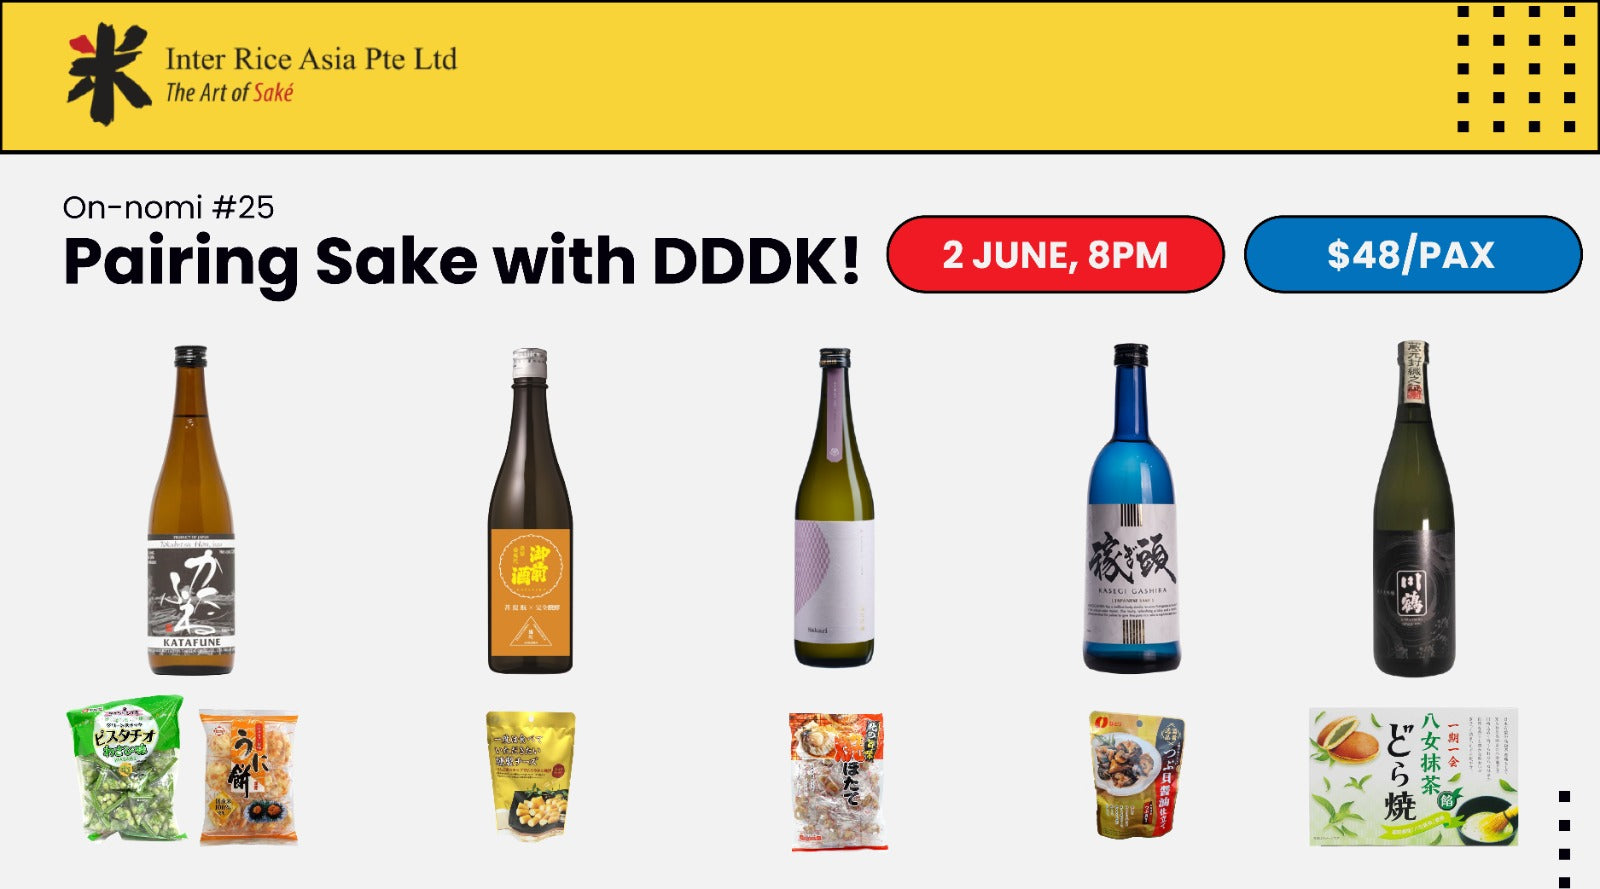 Sake and Snacks Party with DDDK! Onnomi #25